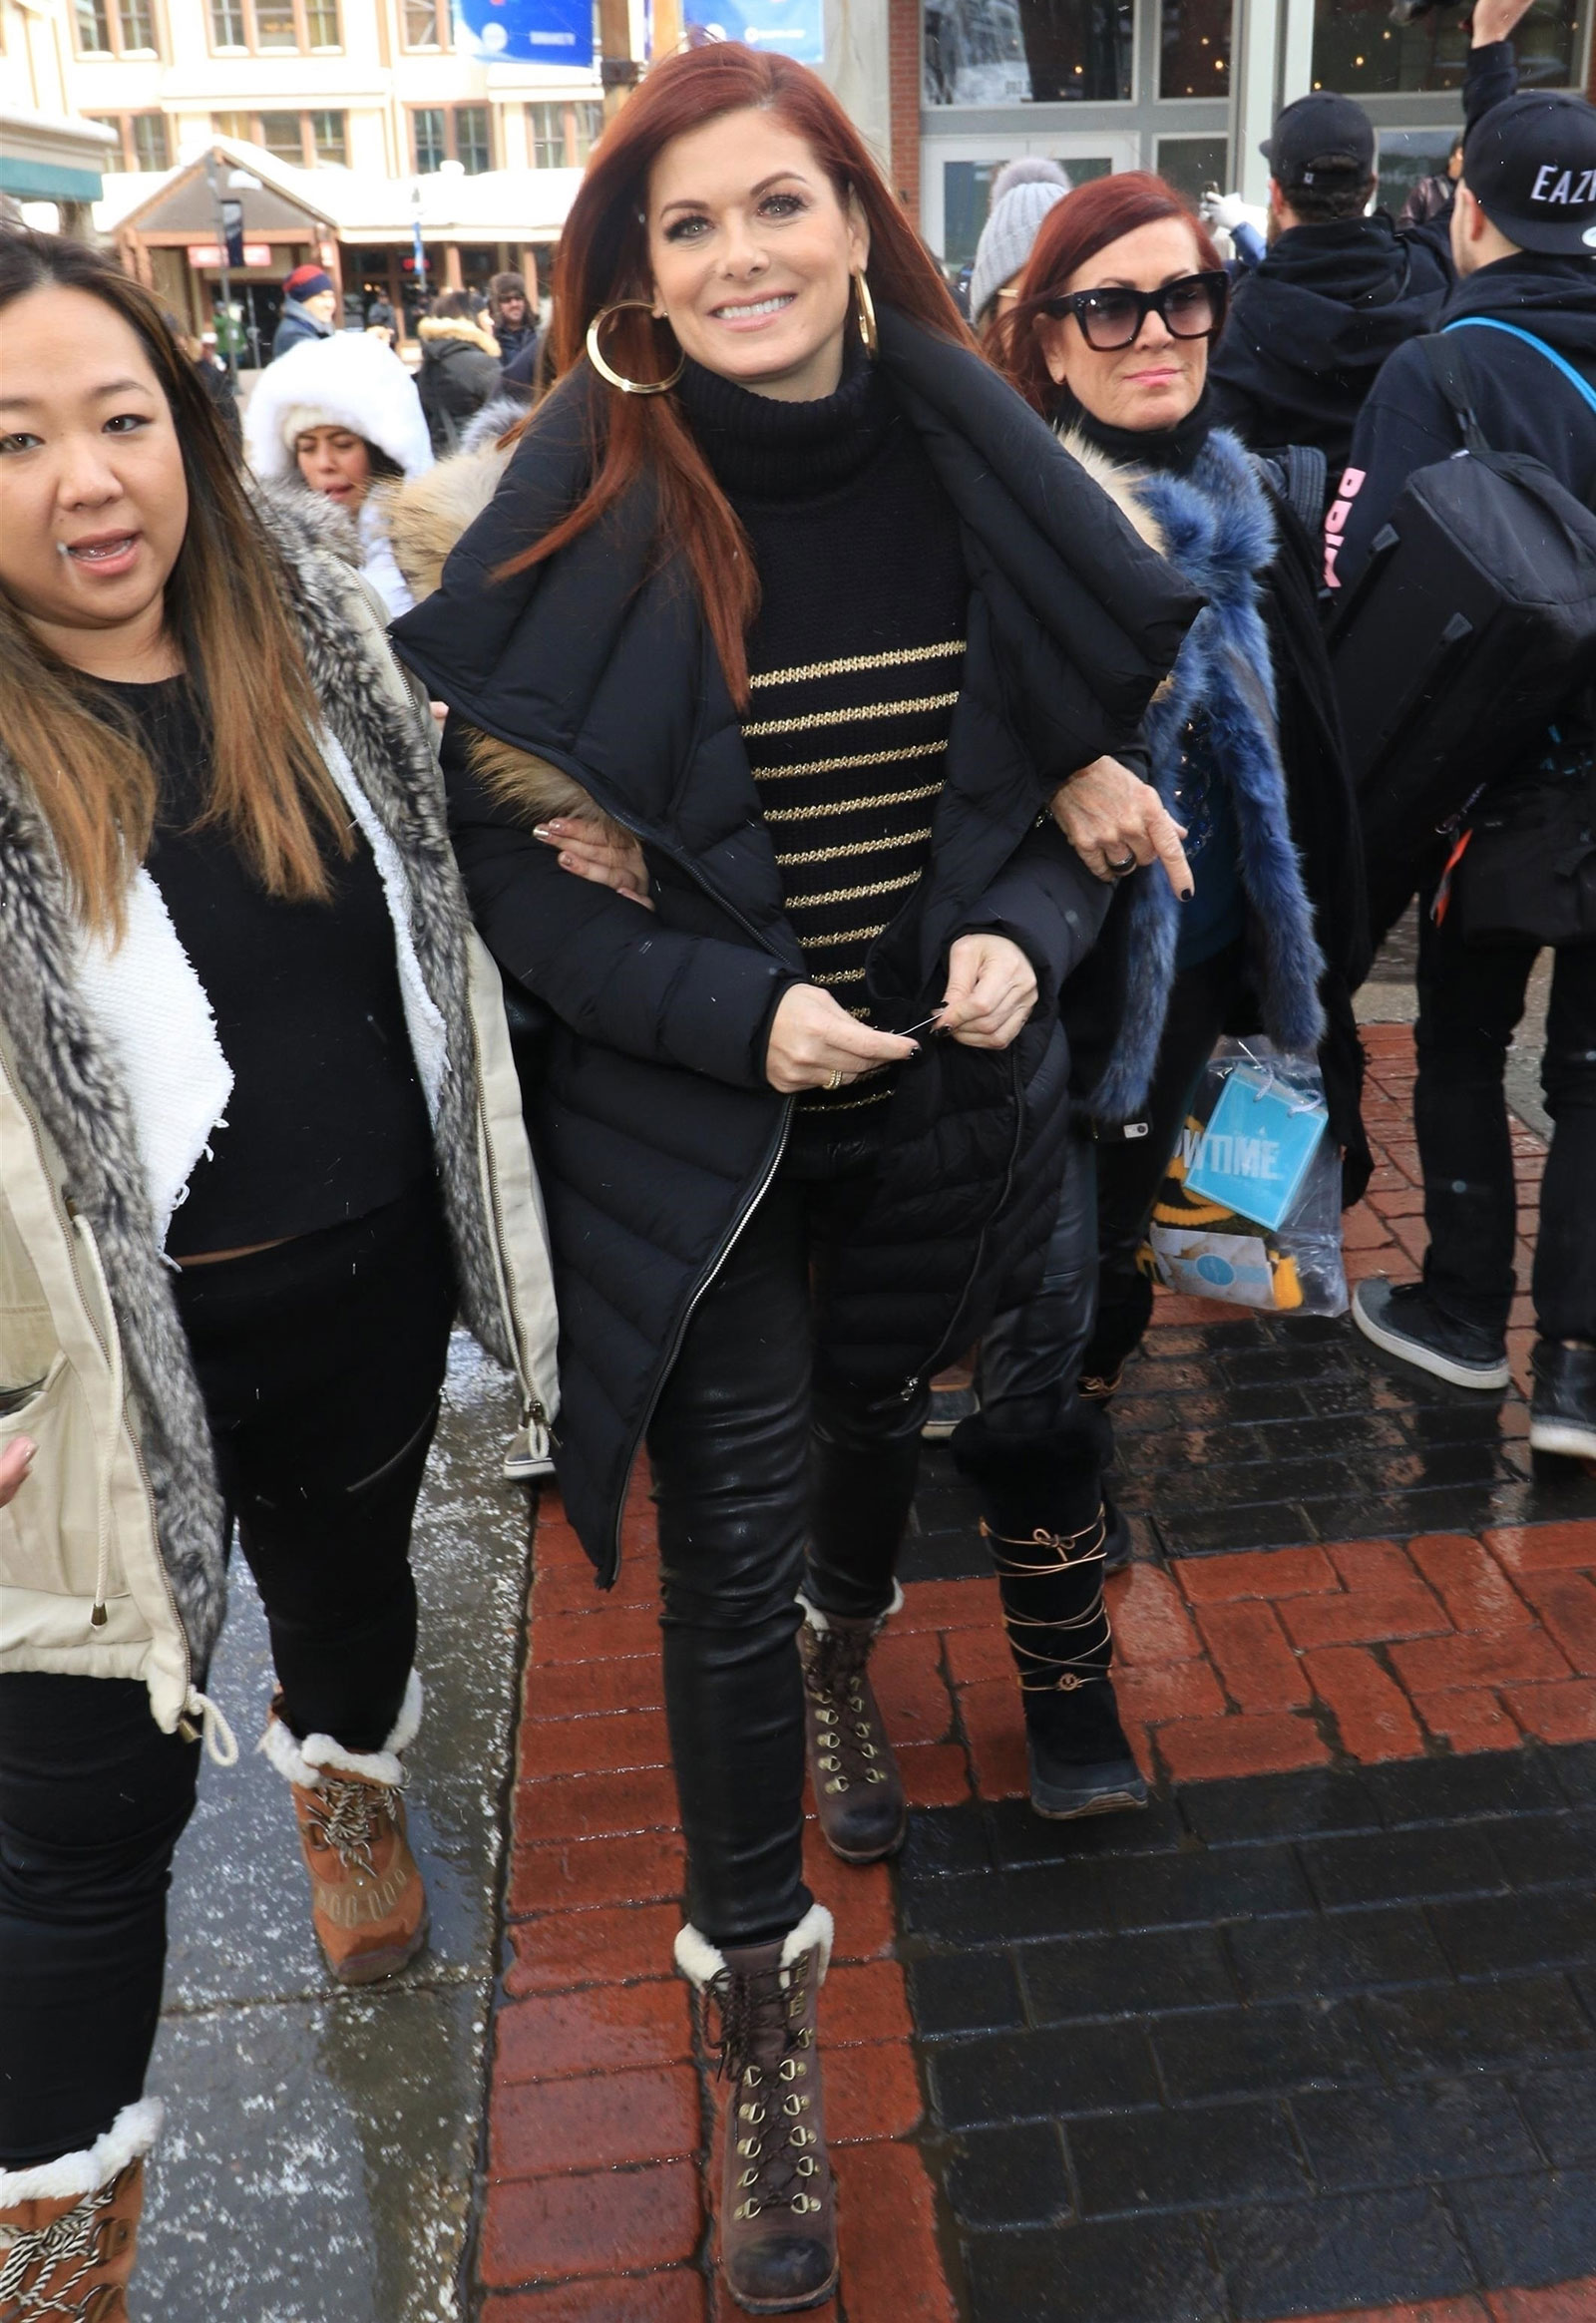 Debra Messing wears a Rudsak coat and Sorel boots while out and about at the Sundance Film Festival in Utah.